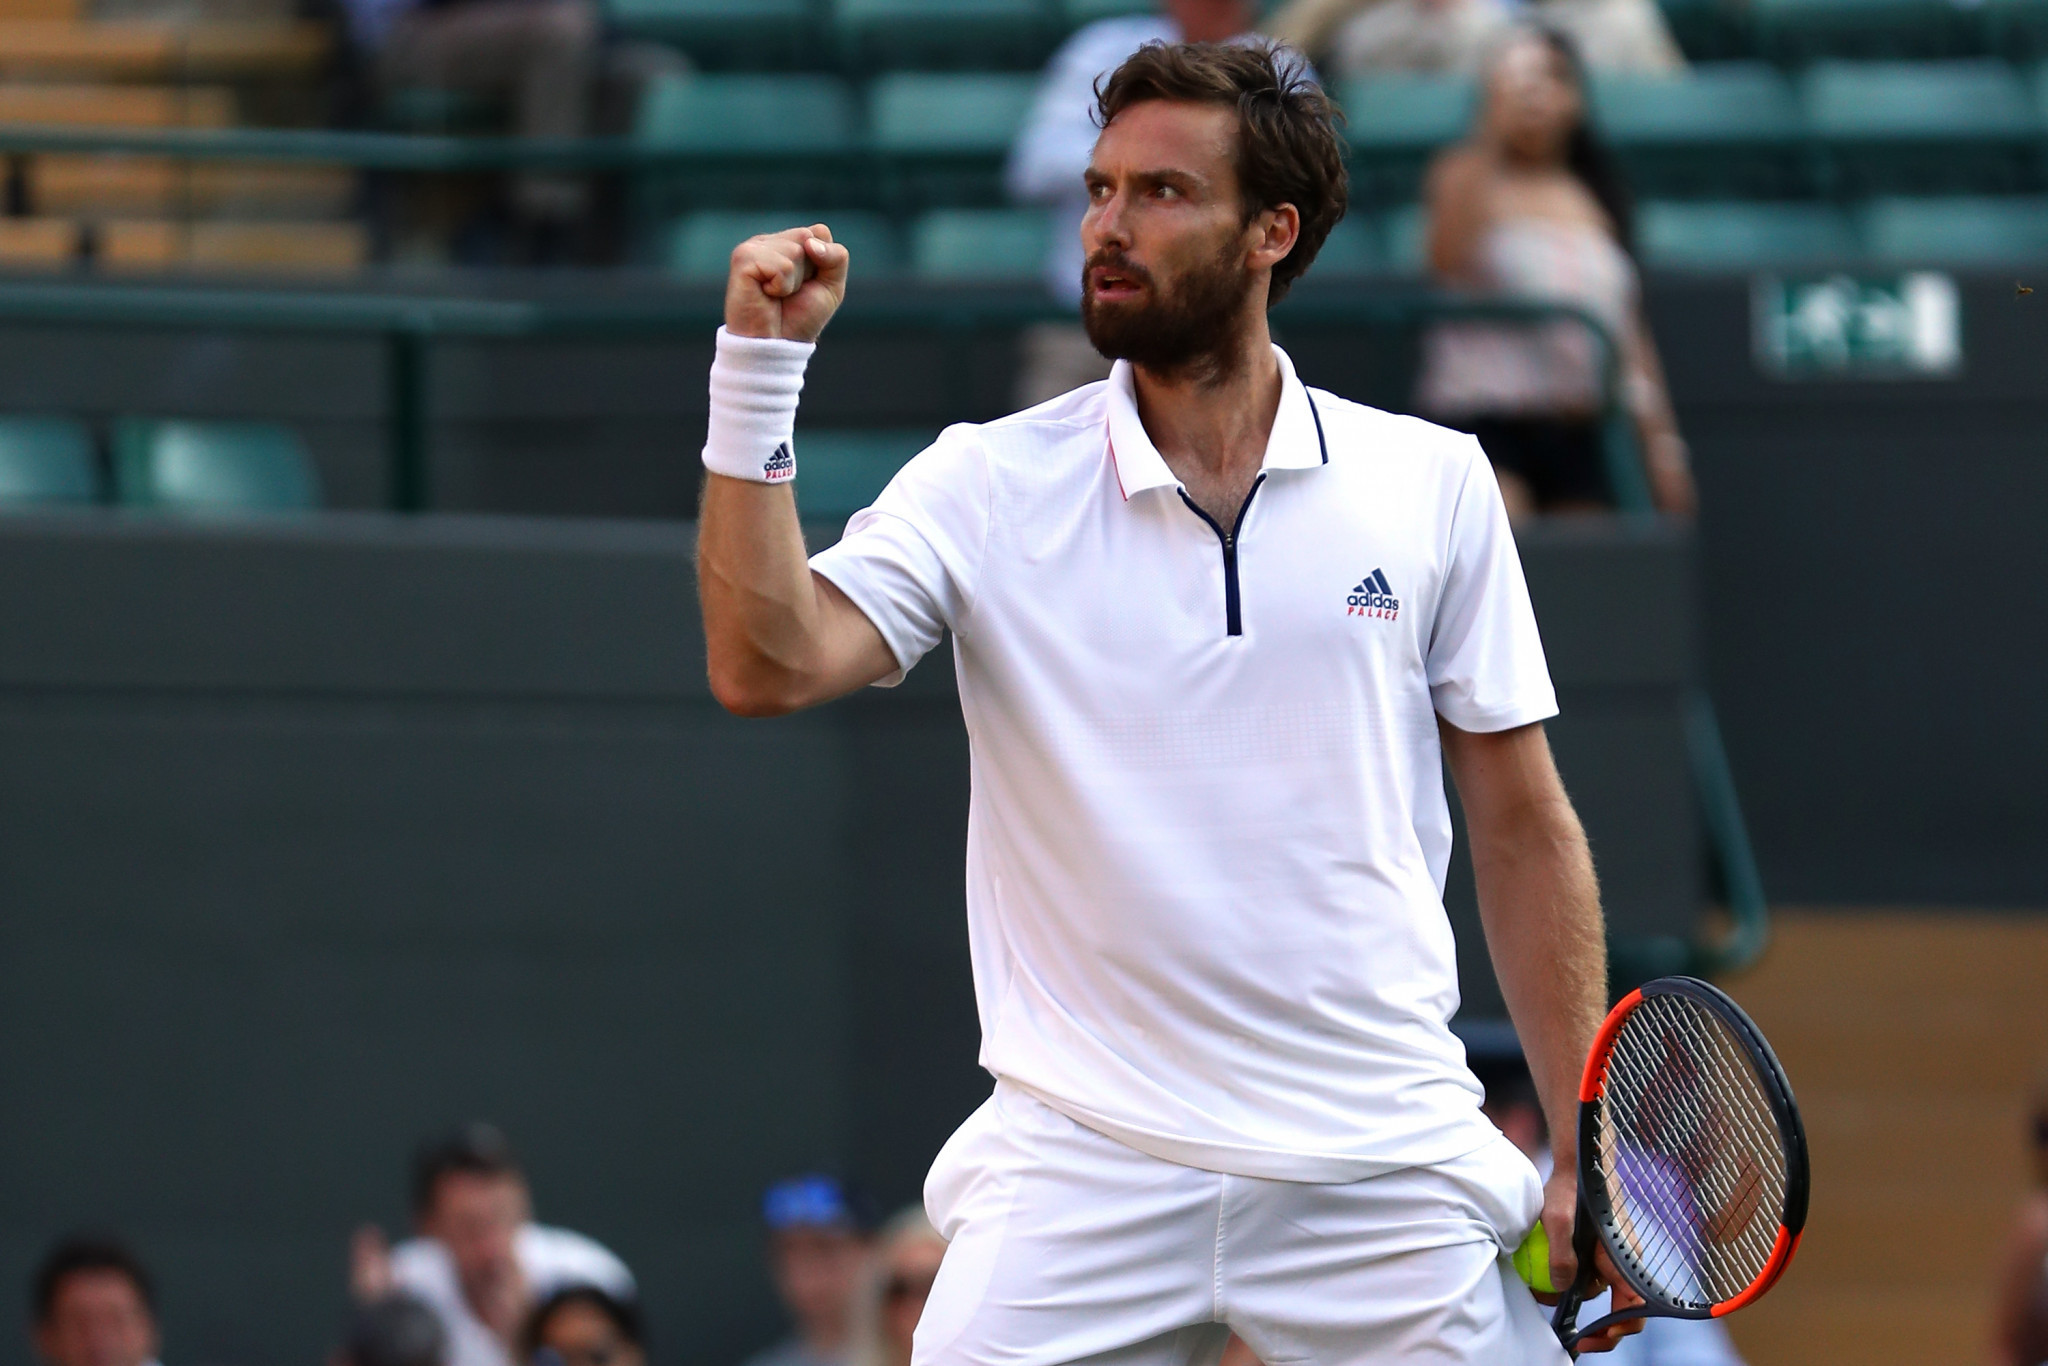 Ernests Gulbis of Latvia was among the surprise winners at Wimbledon today ©Getty Images